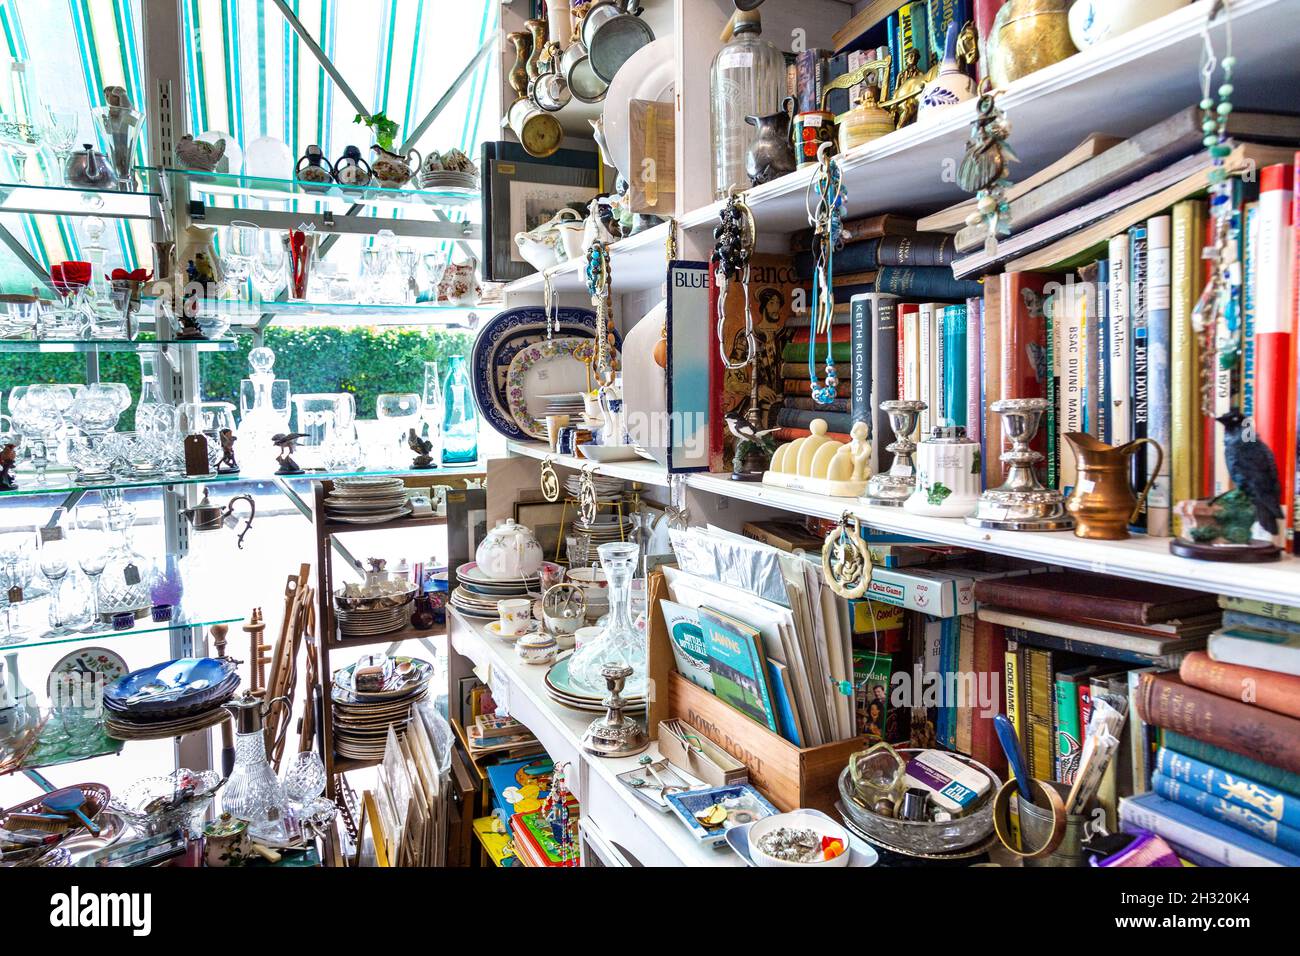 Display of glassware, books and crockery at an antique shop (Hampton Court Emporium, East Molesey, UK) Stock Photo